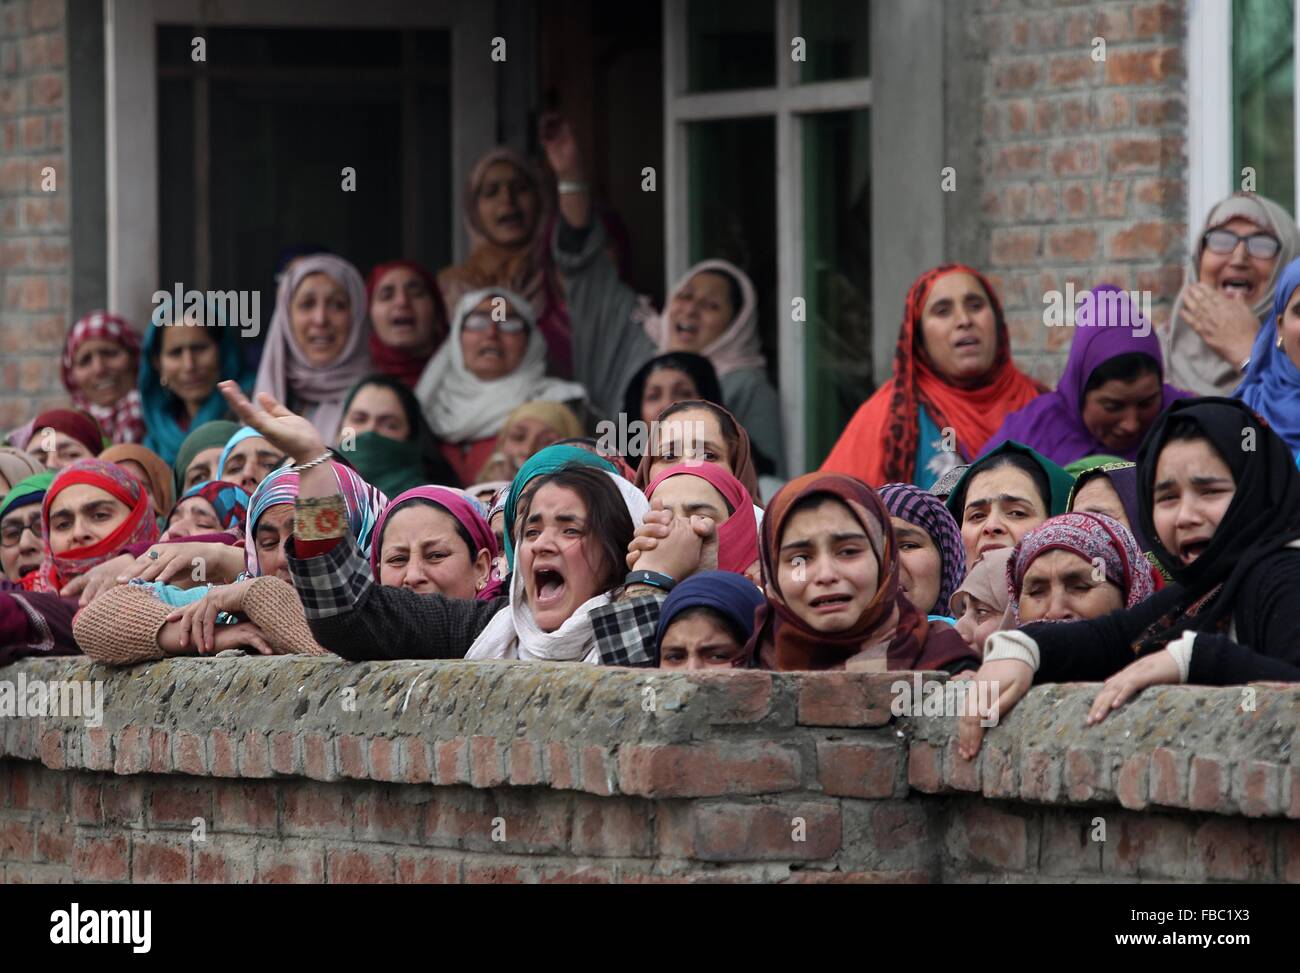 (160114) -- SRINAGAR, Jan. 14, 2016 (Xinhua) -- Kashmiri women wail over the death of Owais Bashir Malik, an engineering student, during his funeral procession in Srinagar, summer capital of Indian-controlled Kashmir, Jan. 14, 2016. Indian police fired warning shots and tear gas shells to disperse hundreds of Kashmiri protesters who had blocked road to Srinagar airport and shouting anti-India slogans after the body of a college student with his throat slit was found in the Indian-controlled Kashmir. The protesters accused the Indian army of torturing and killing the student. However, the army Stock Photo